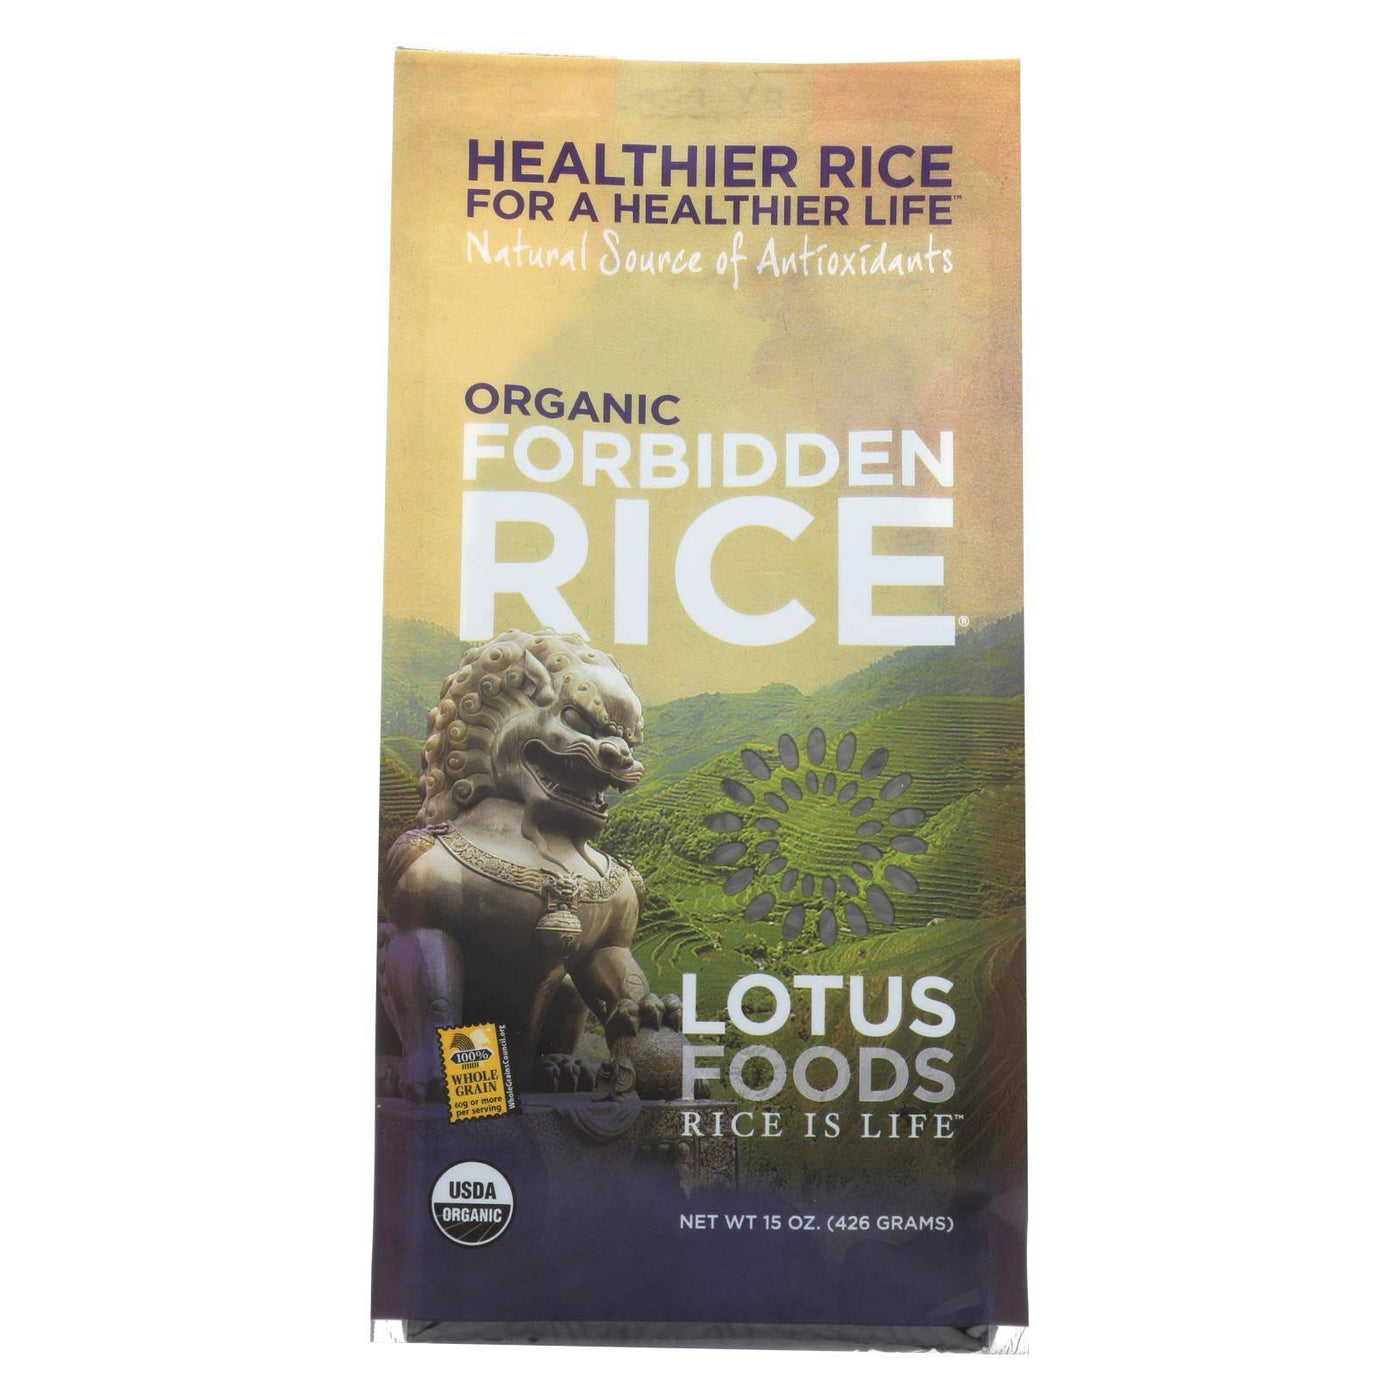 Buy Lotus Foods Heirloom Forbidden Rice - Case Of 6 - 15 Oz.  at OnlyNaturals.us